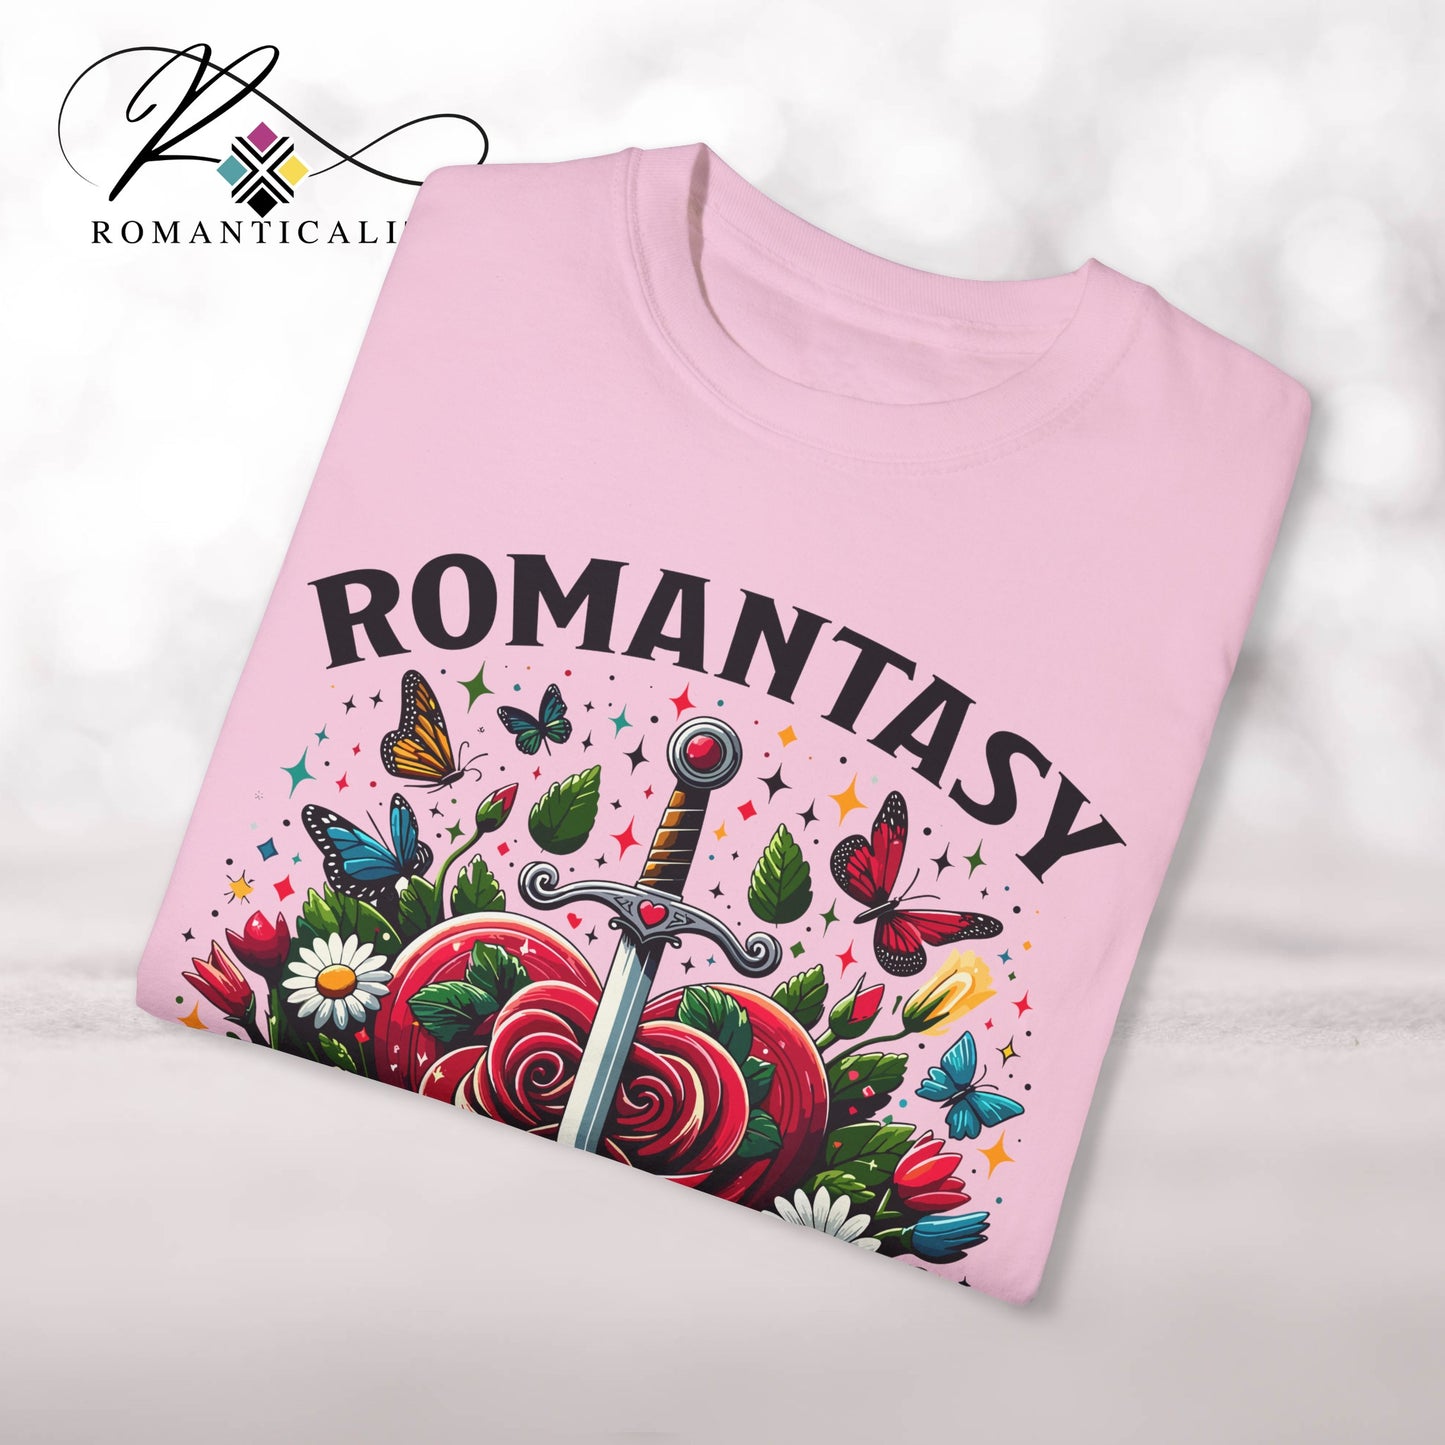 Romantic Book T-Shirt for Book Lovers-Spring Colors-Romance Readers-Book Obsessed-Booktokers-Bookstagram-Smut Lovers-Bookish Quote